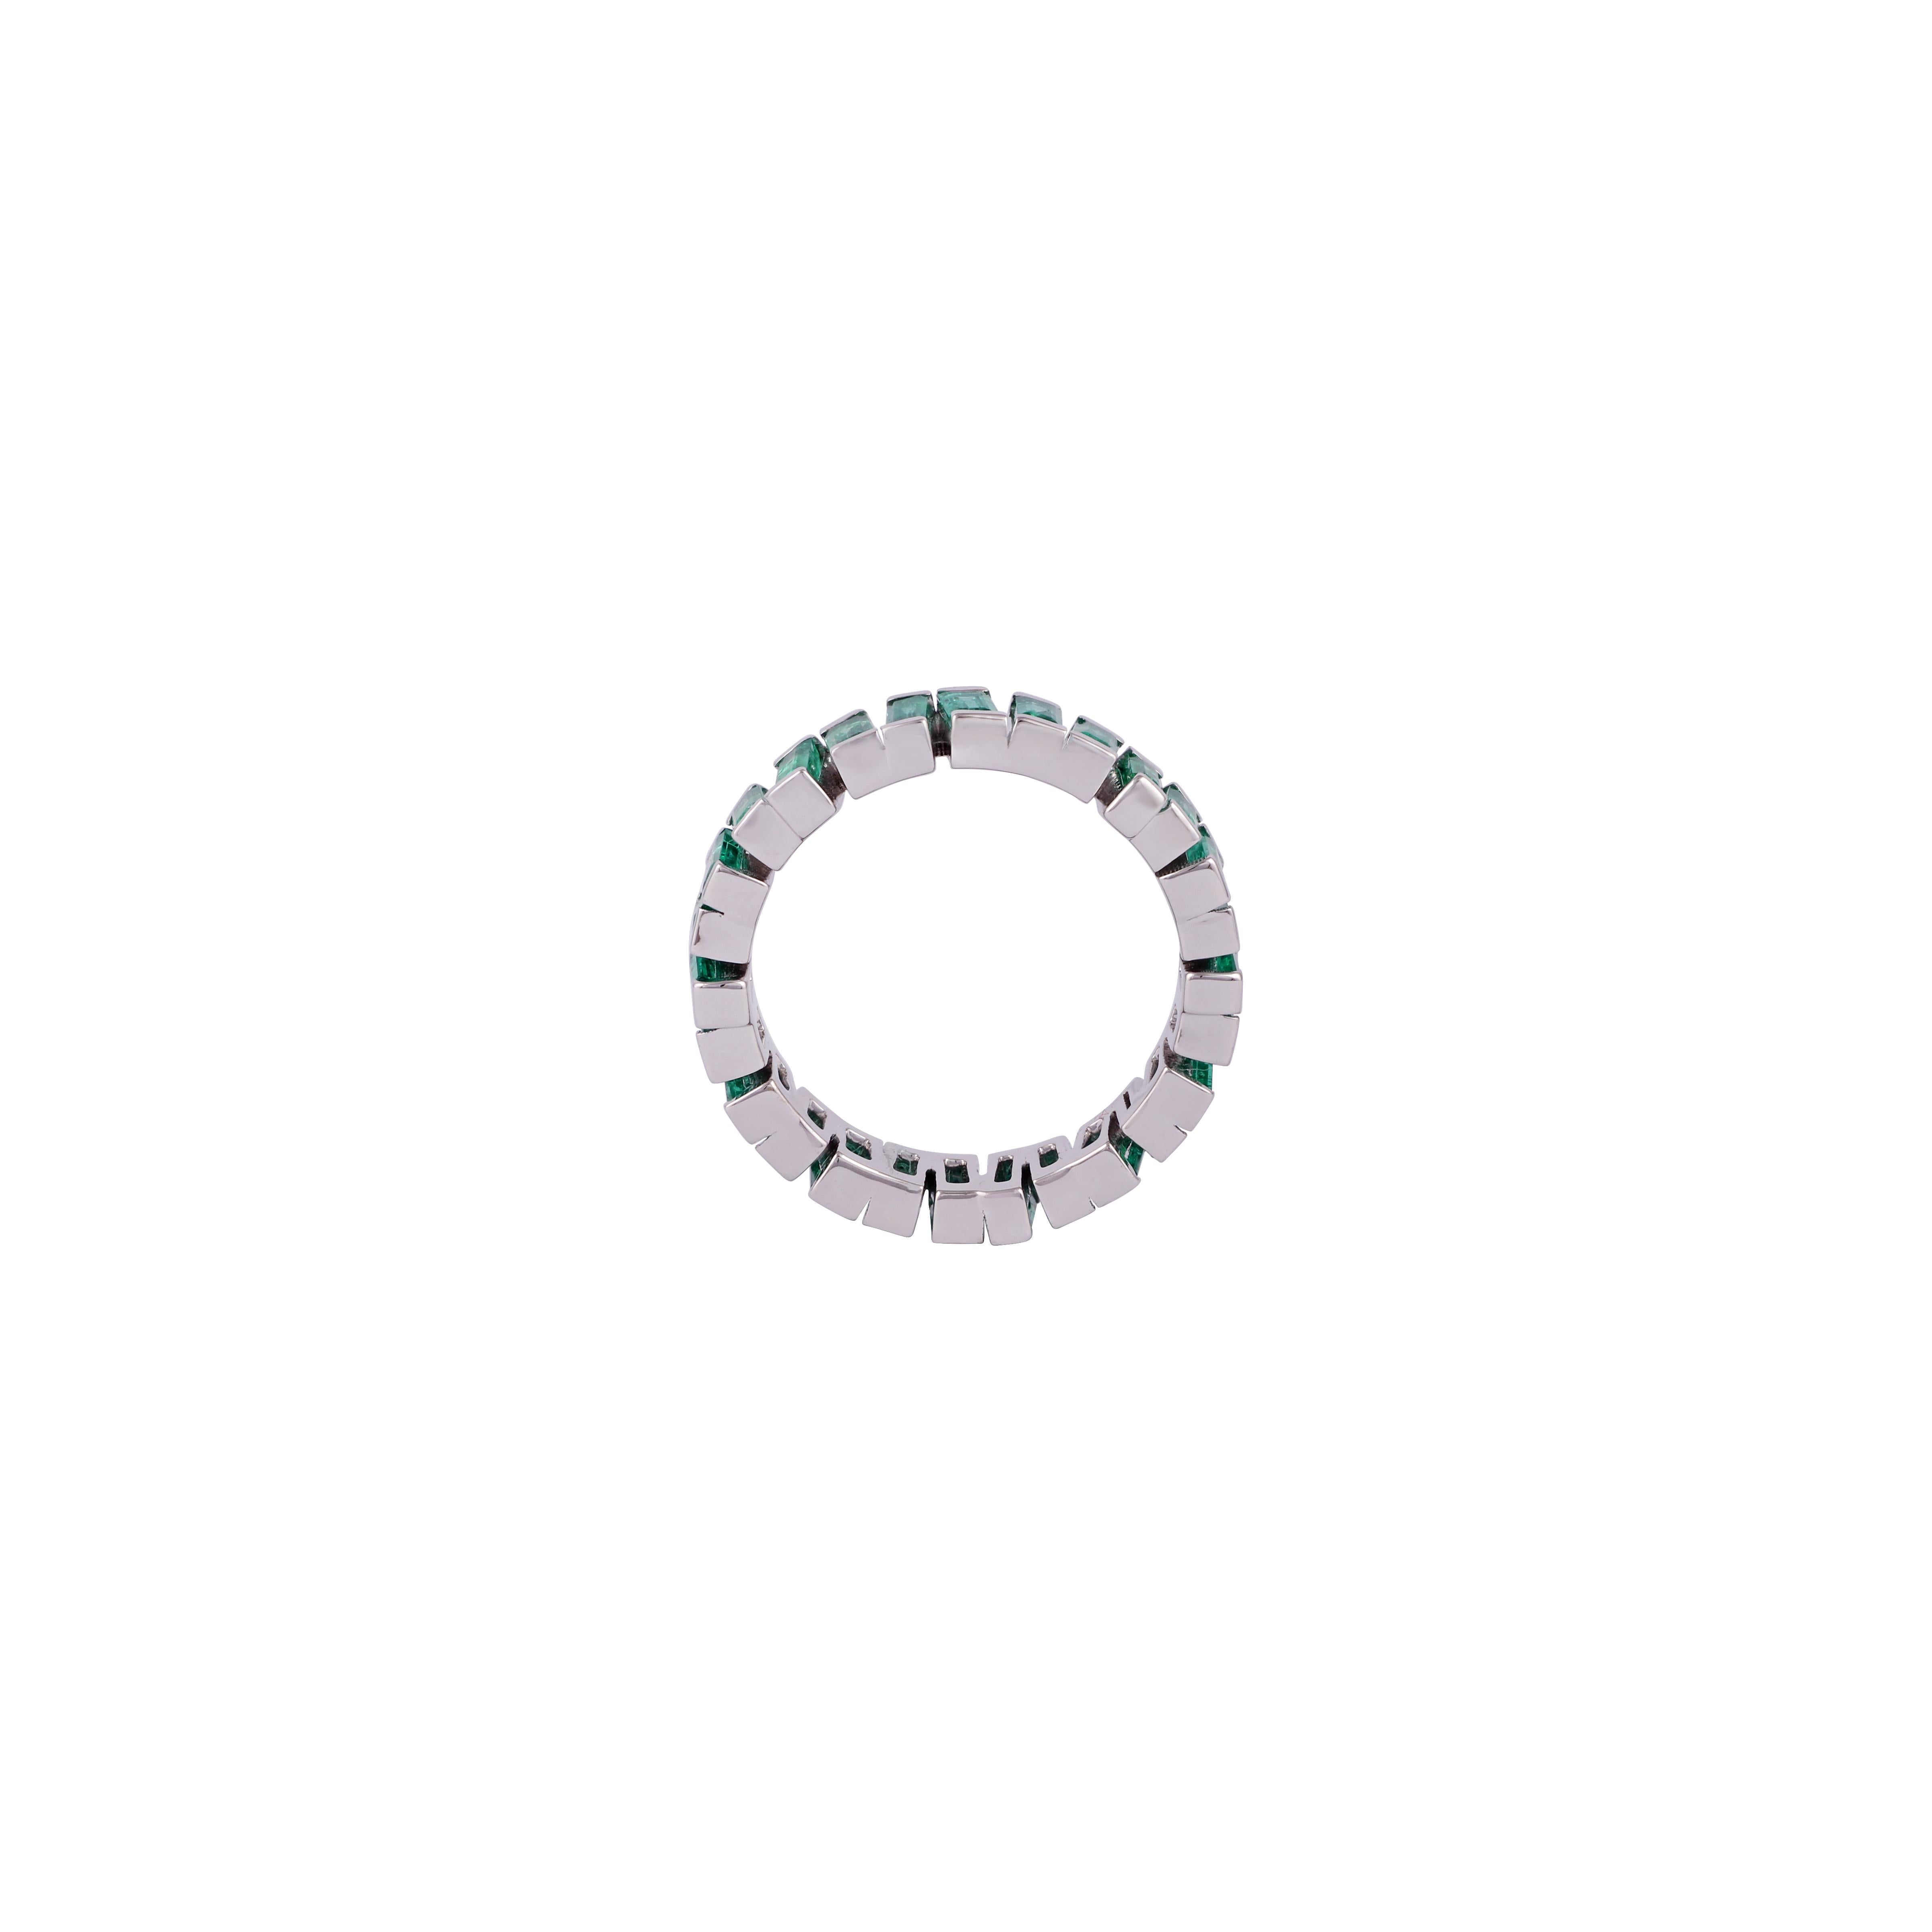 Baguette Cut Emerald Ring Studded in 18K White Gold